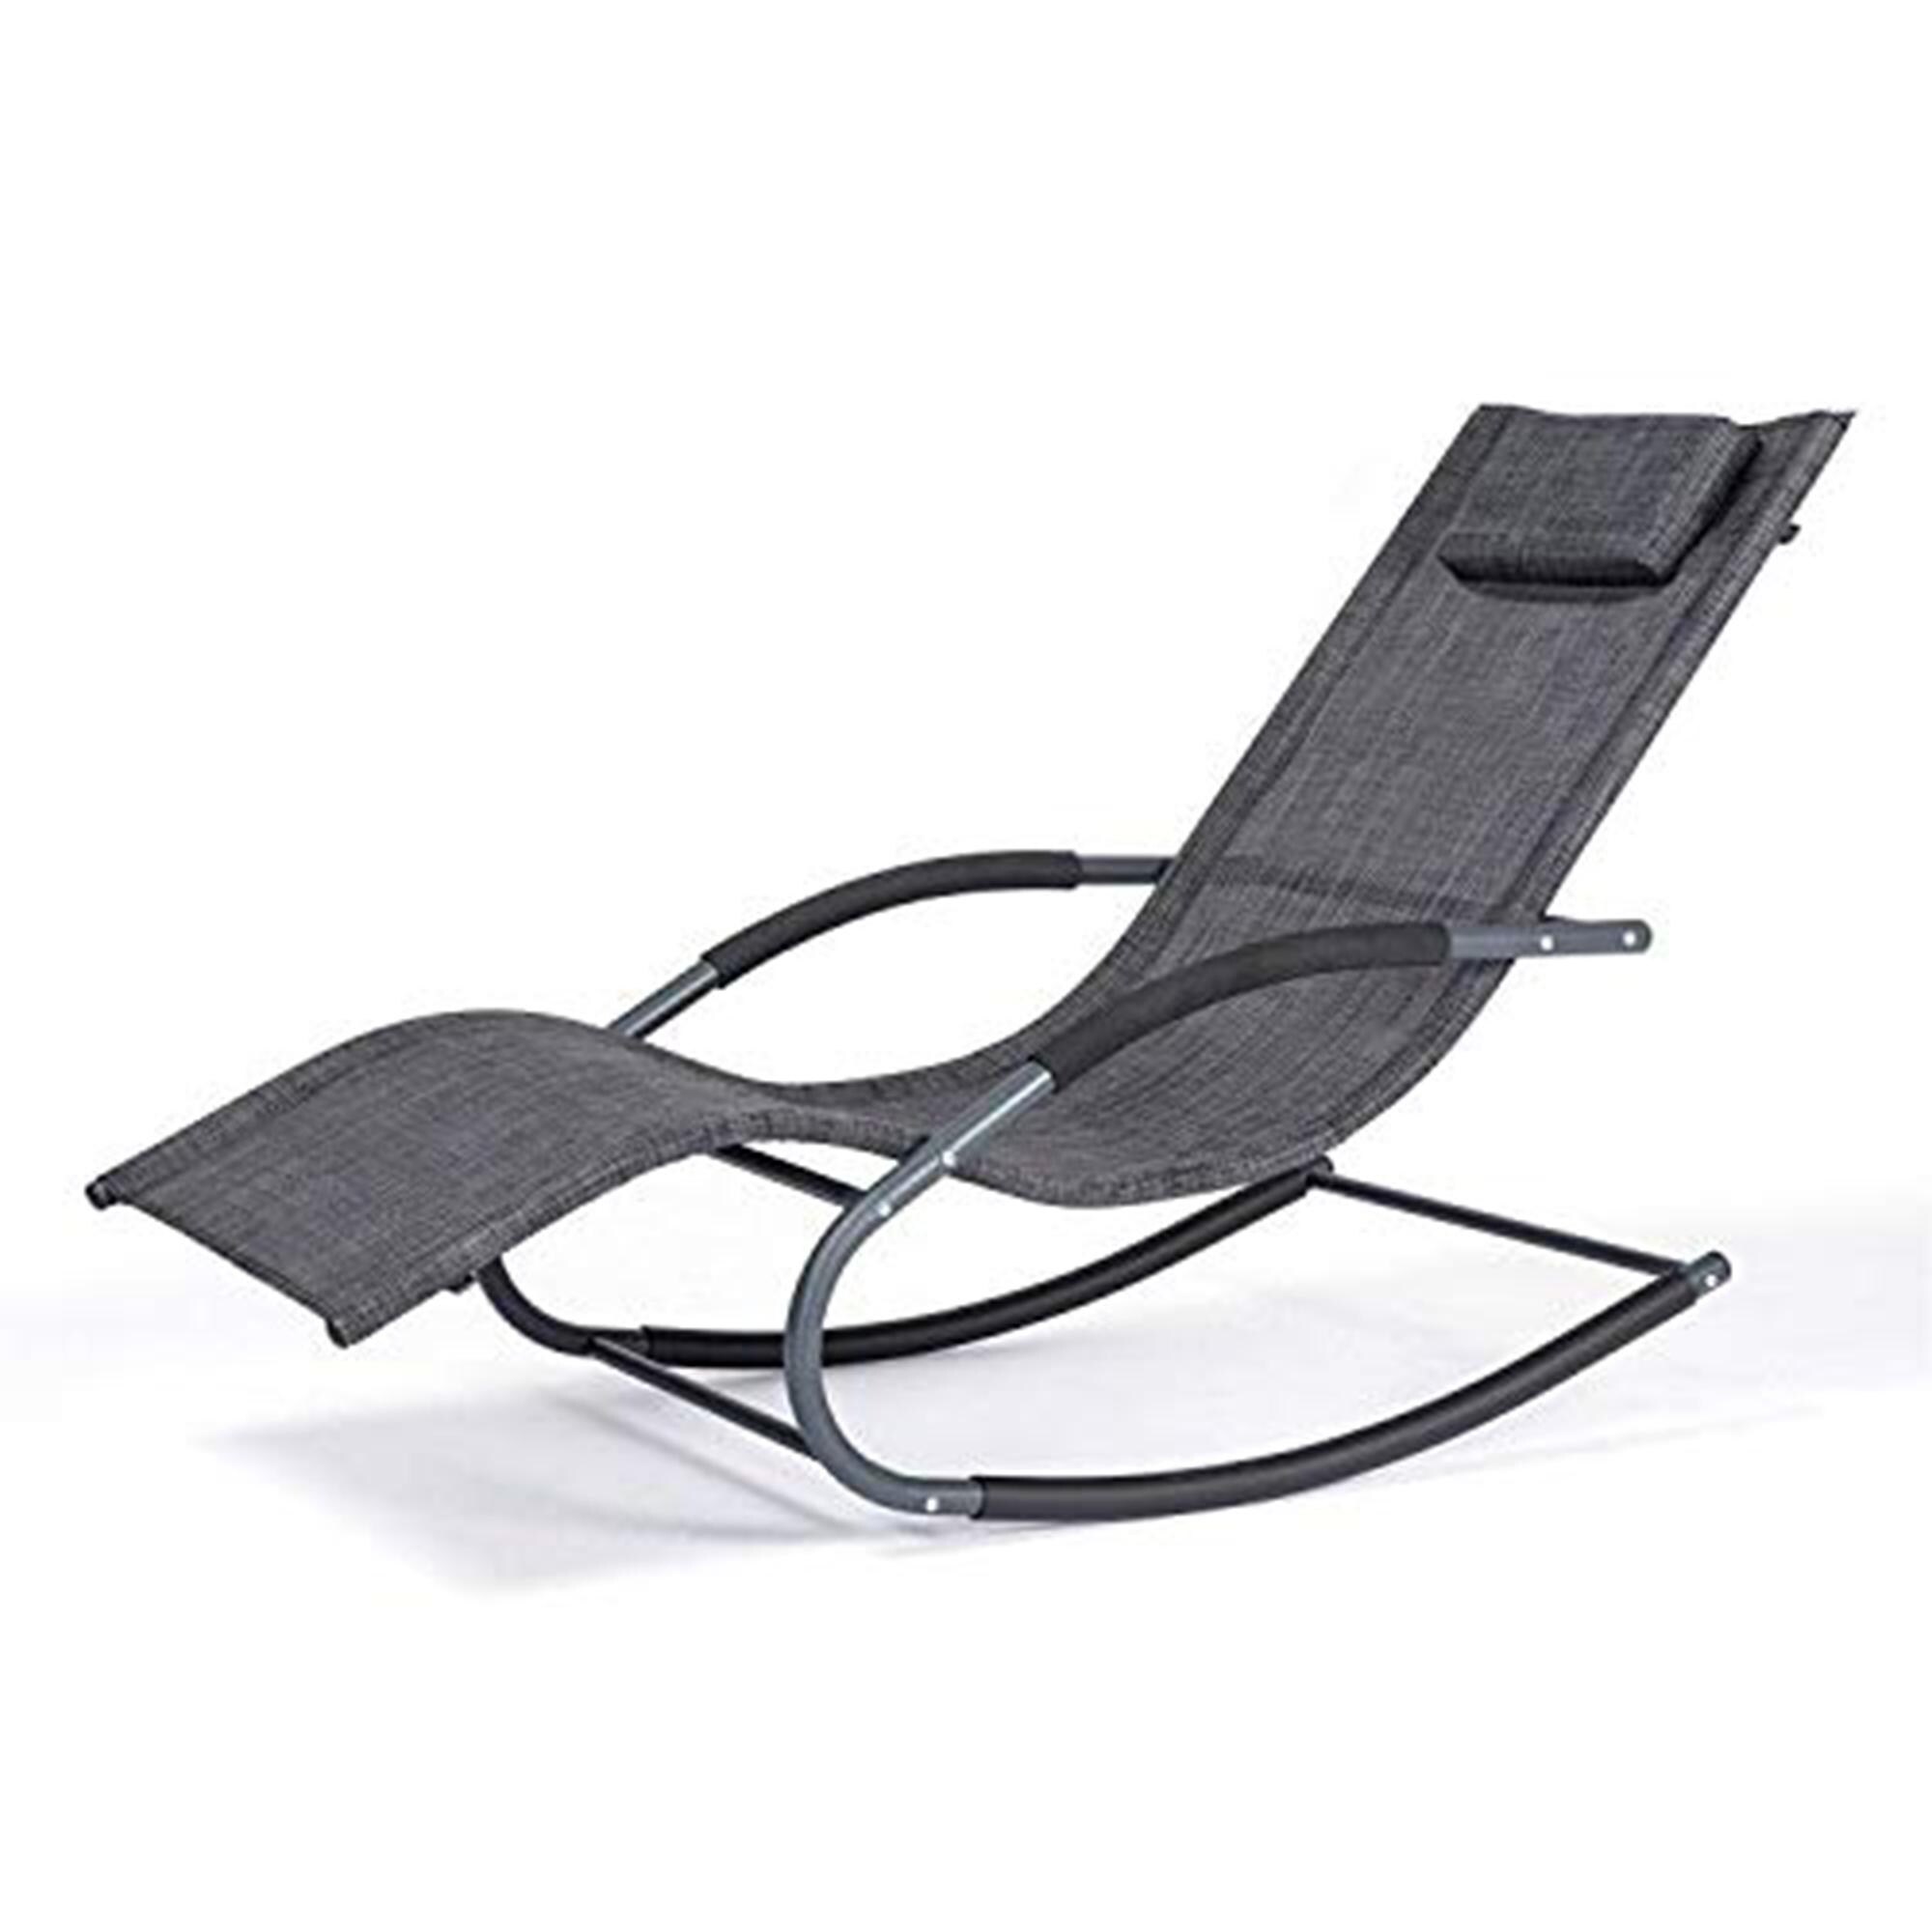 Outdoor Armrest  Lounge Chair, Chaise Lounge with Removable Pillow, 266 lbs Capacity, Dark Gray - image 1 of 8